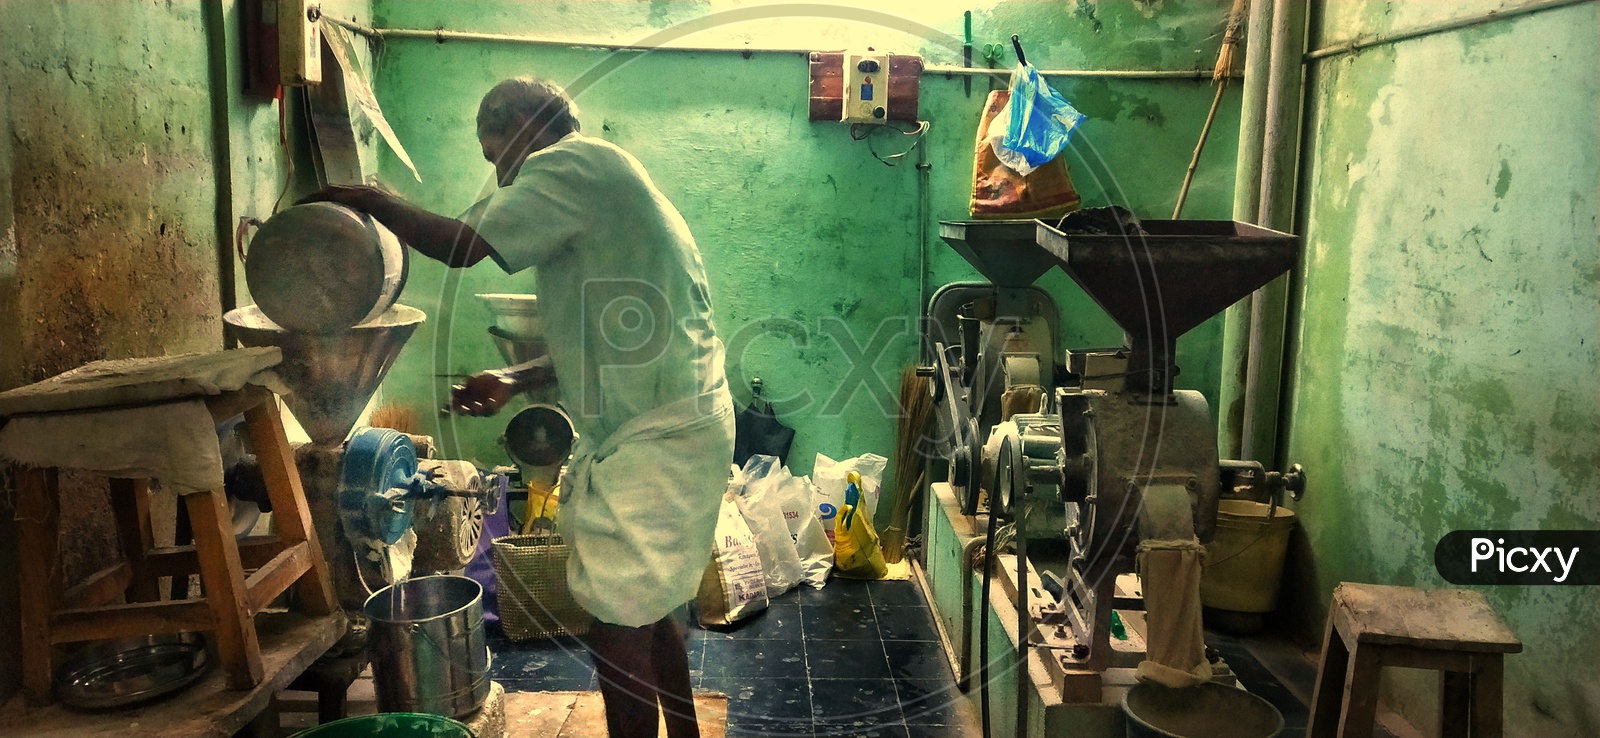 An old man working relentlessly in his flour grinding shop at night